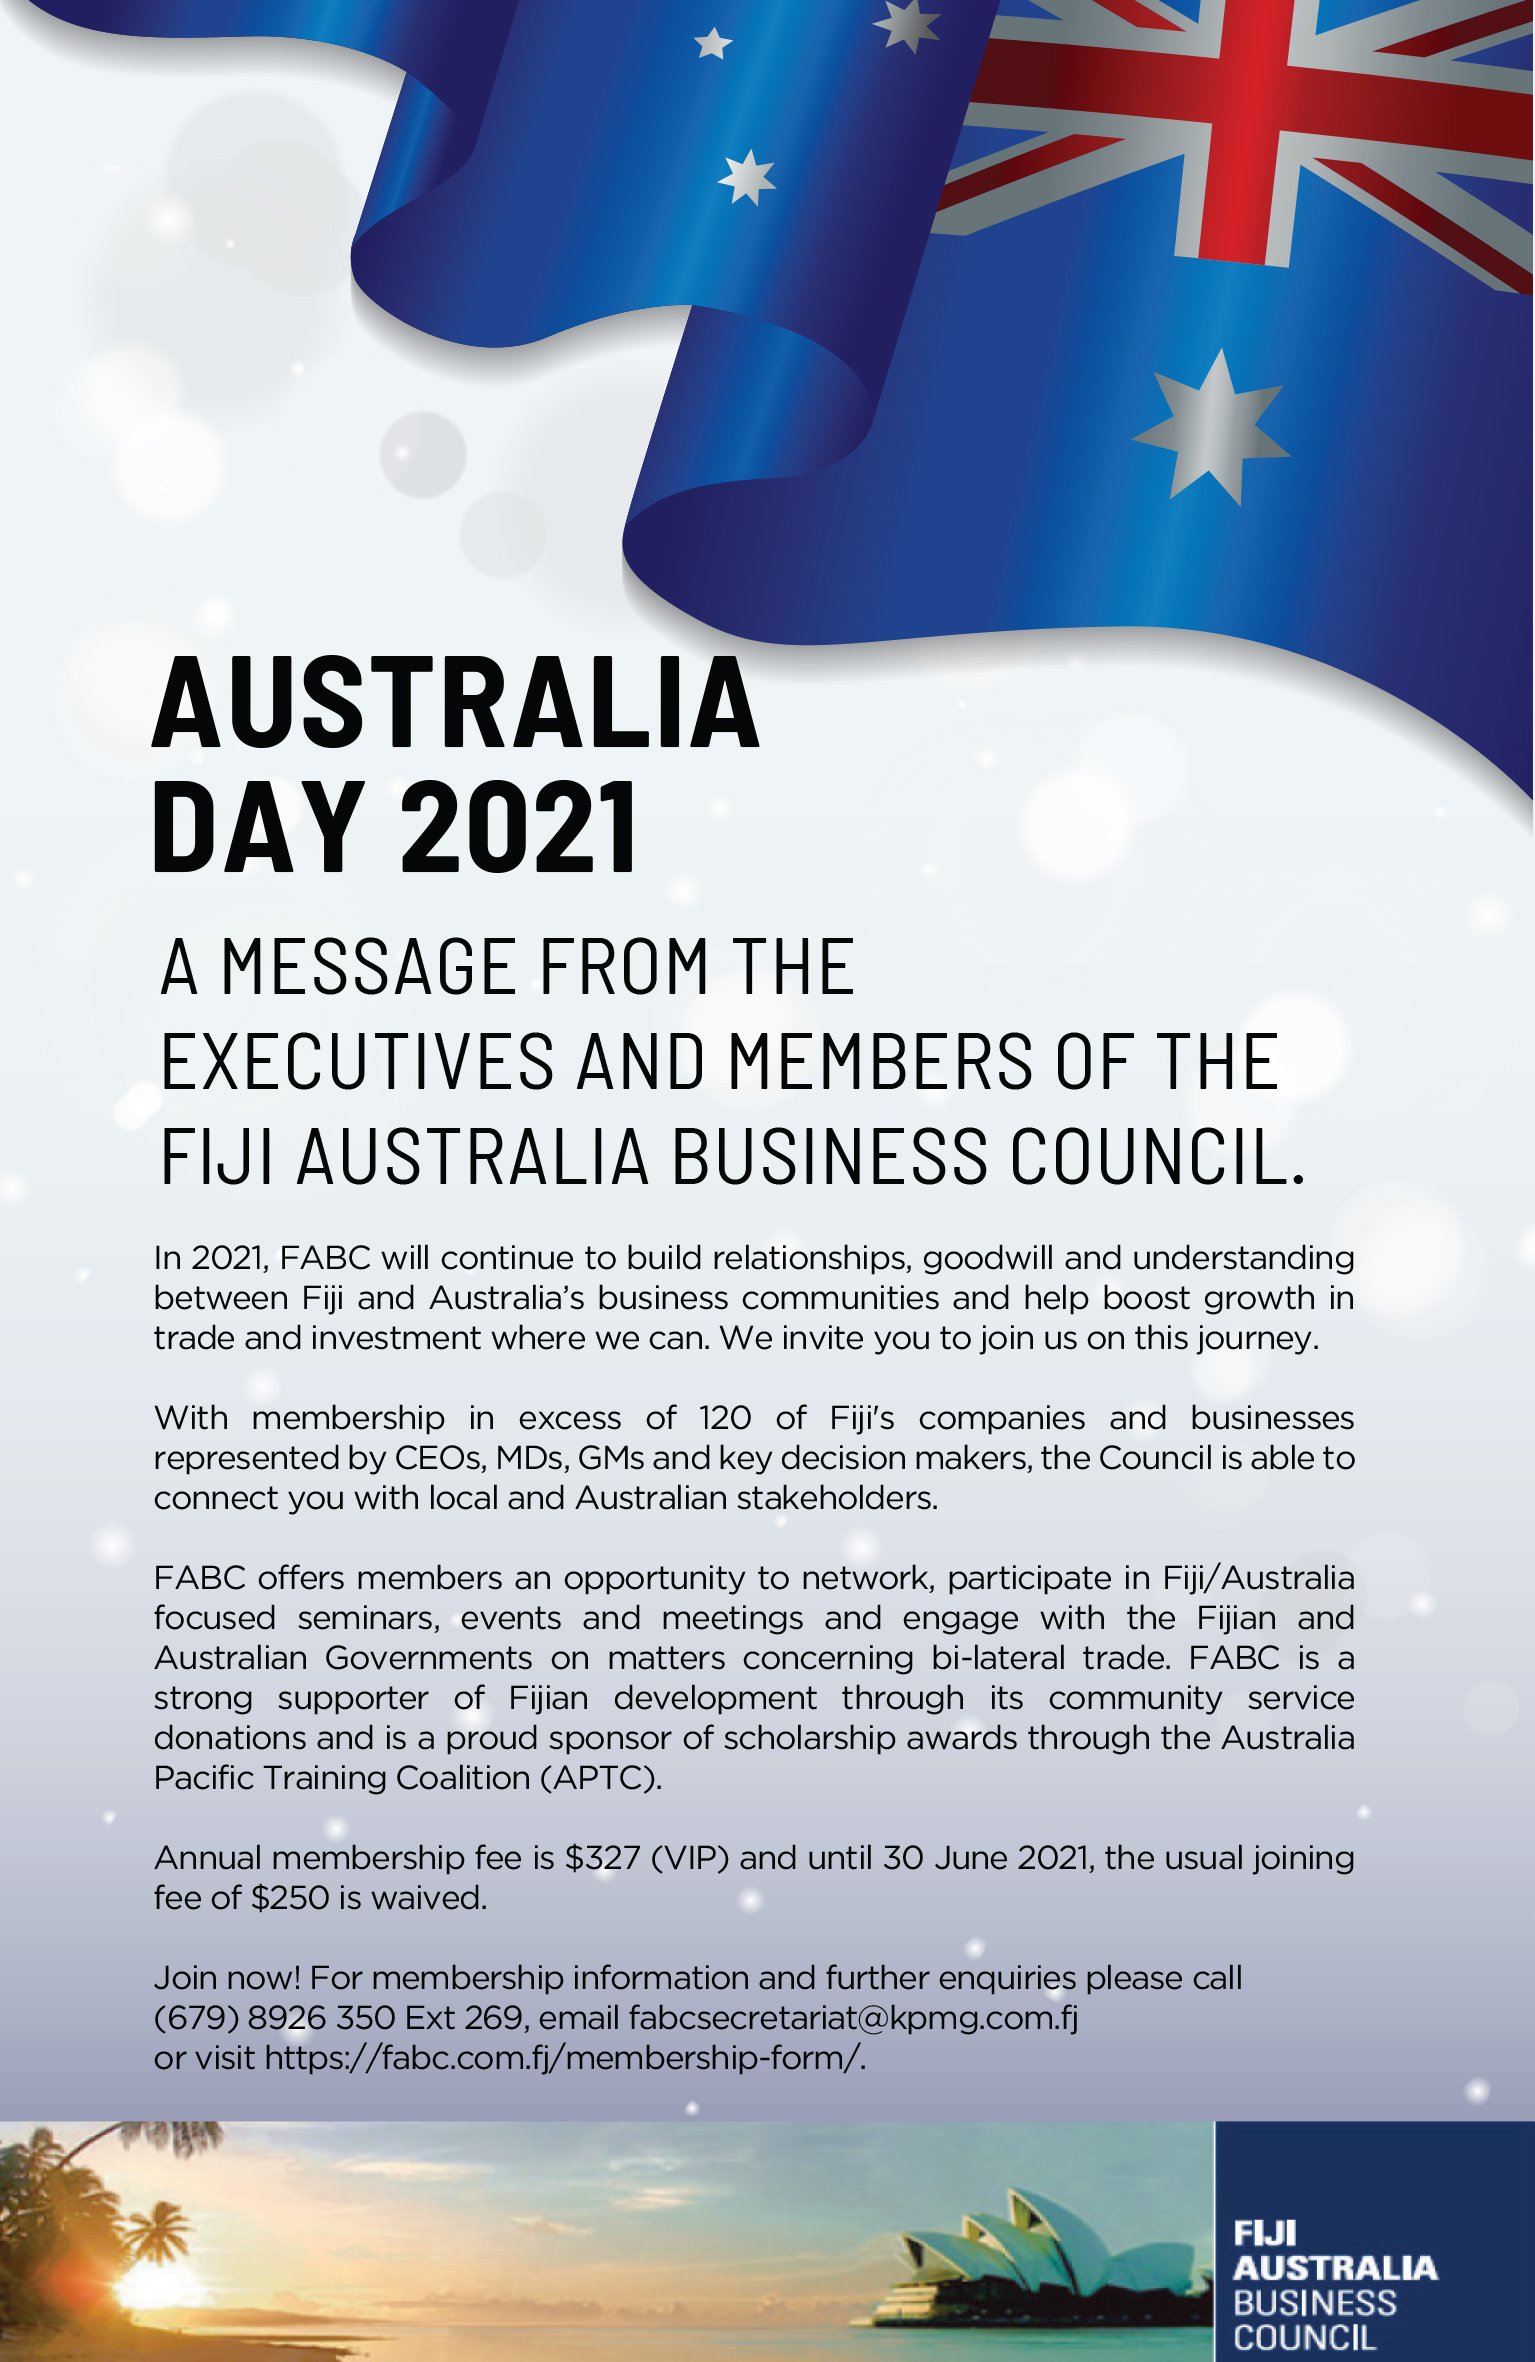 A Message From The Executives And Members Of The Fiji Australia Business Council